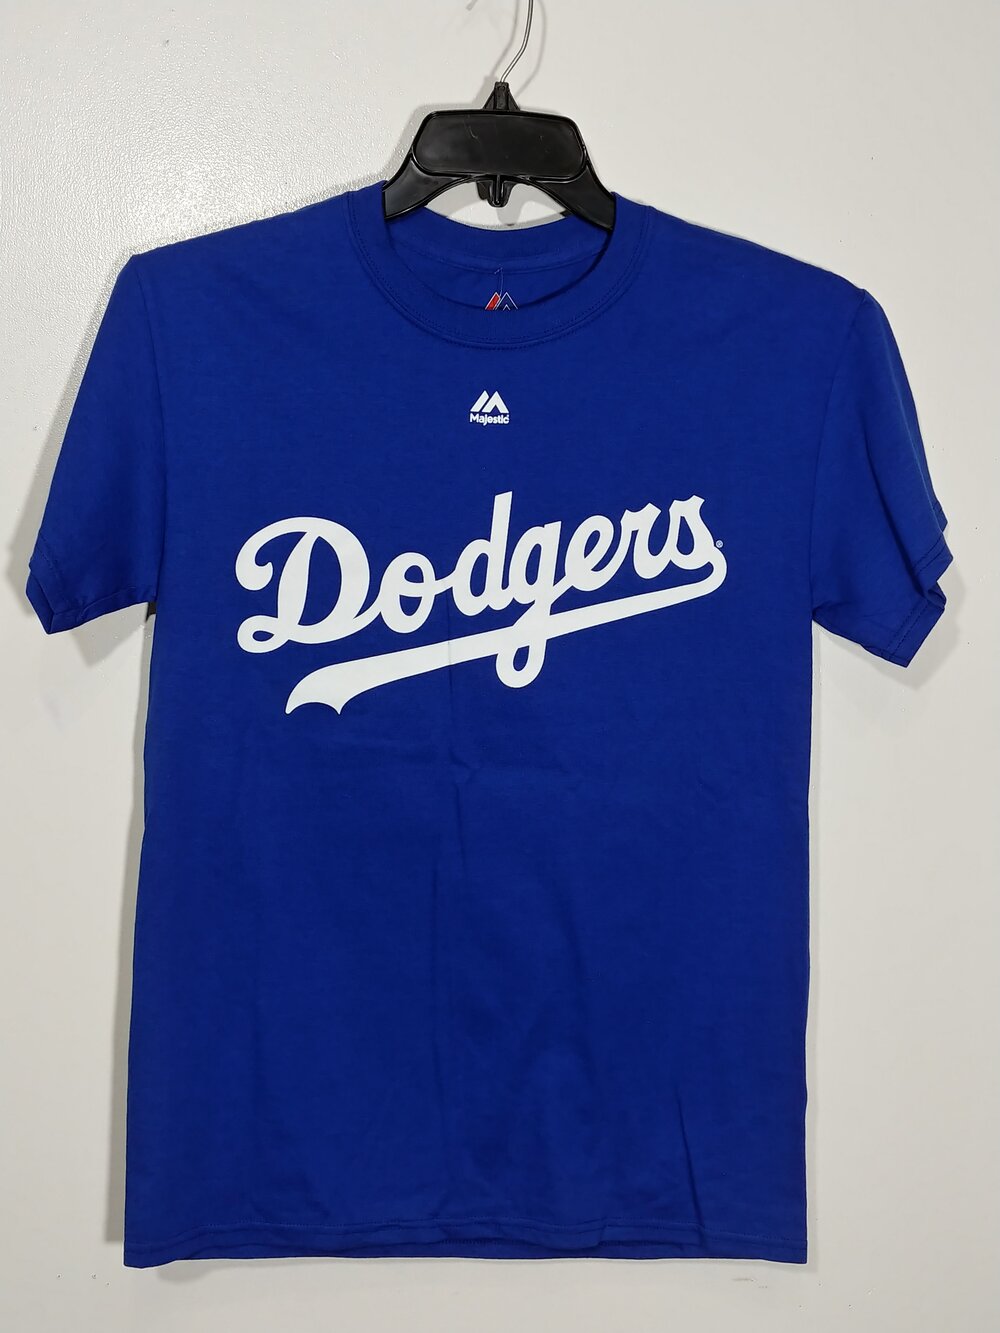 Hall of Fame - Dodgers Kirk Gibson #23 — Hats N Stuff